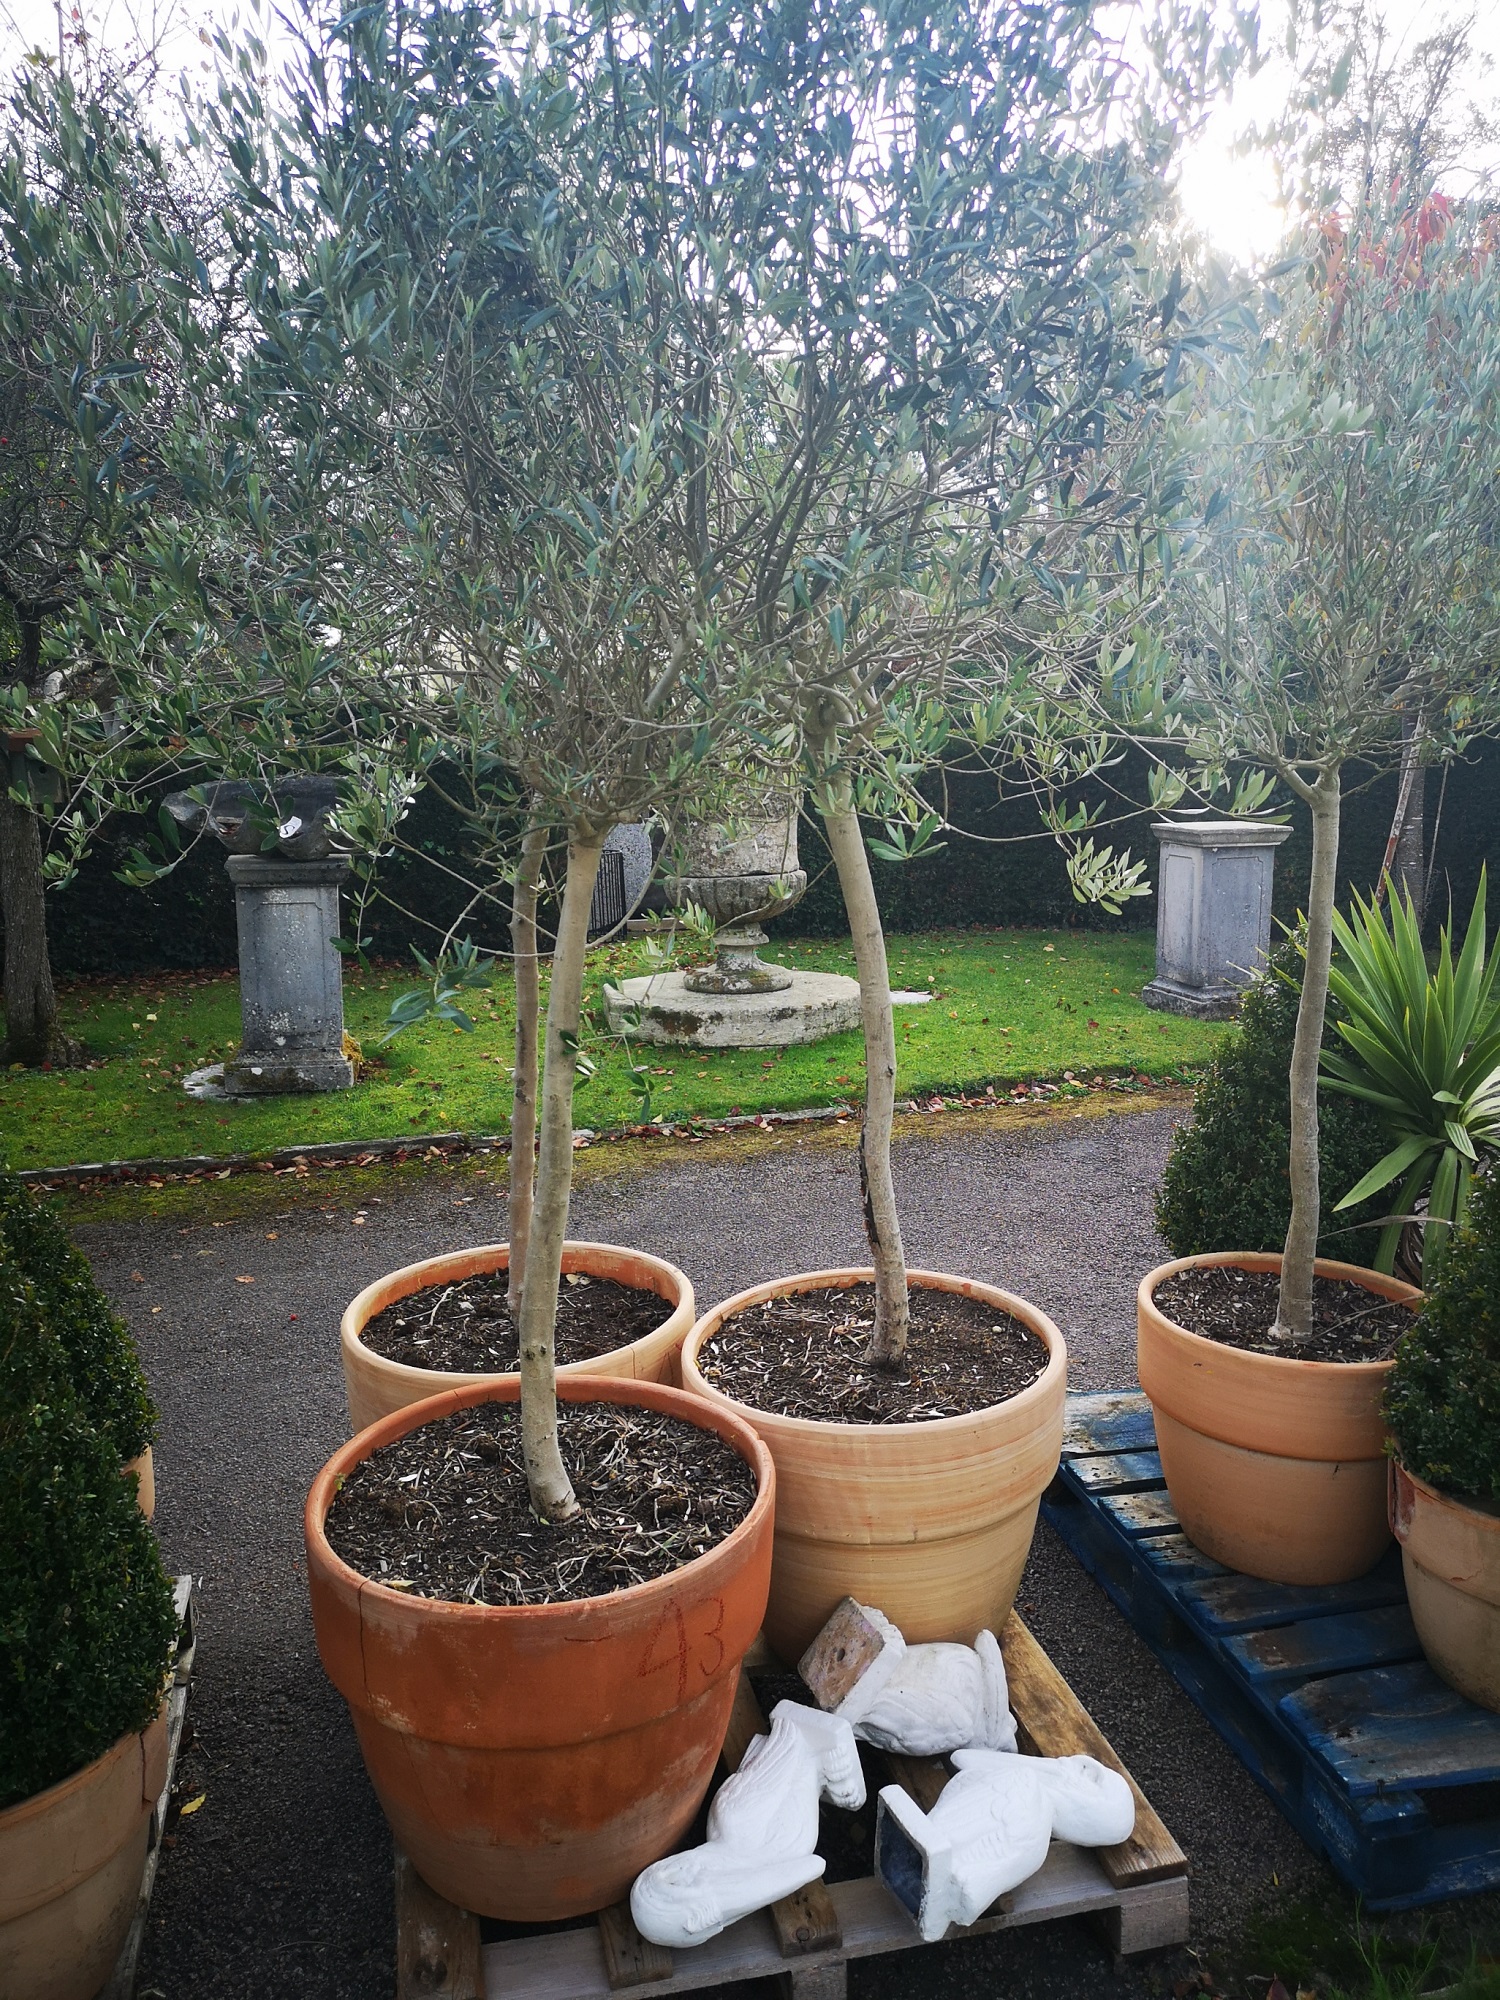 Four olive trees each approx 220cm high